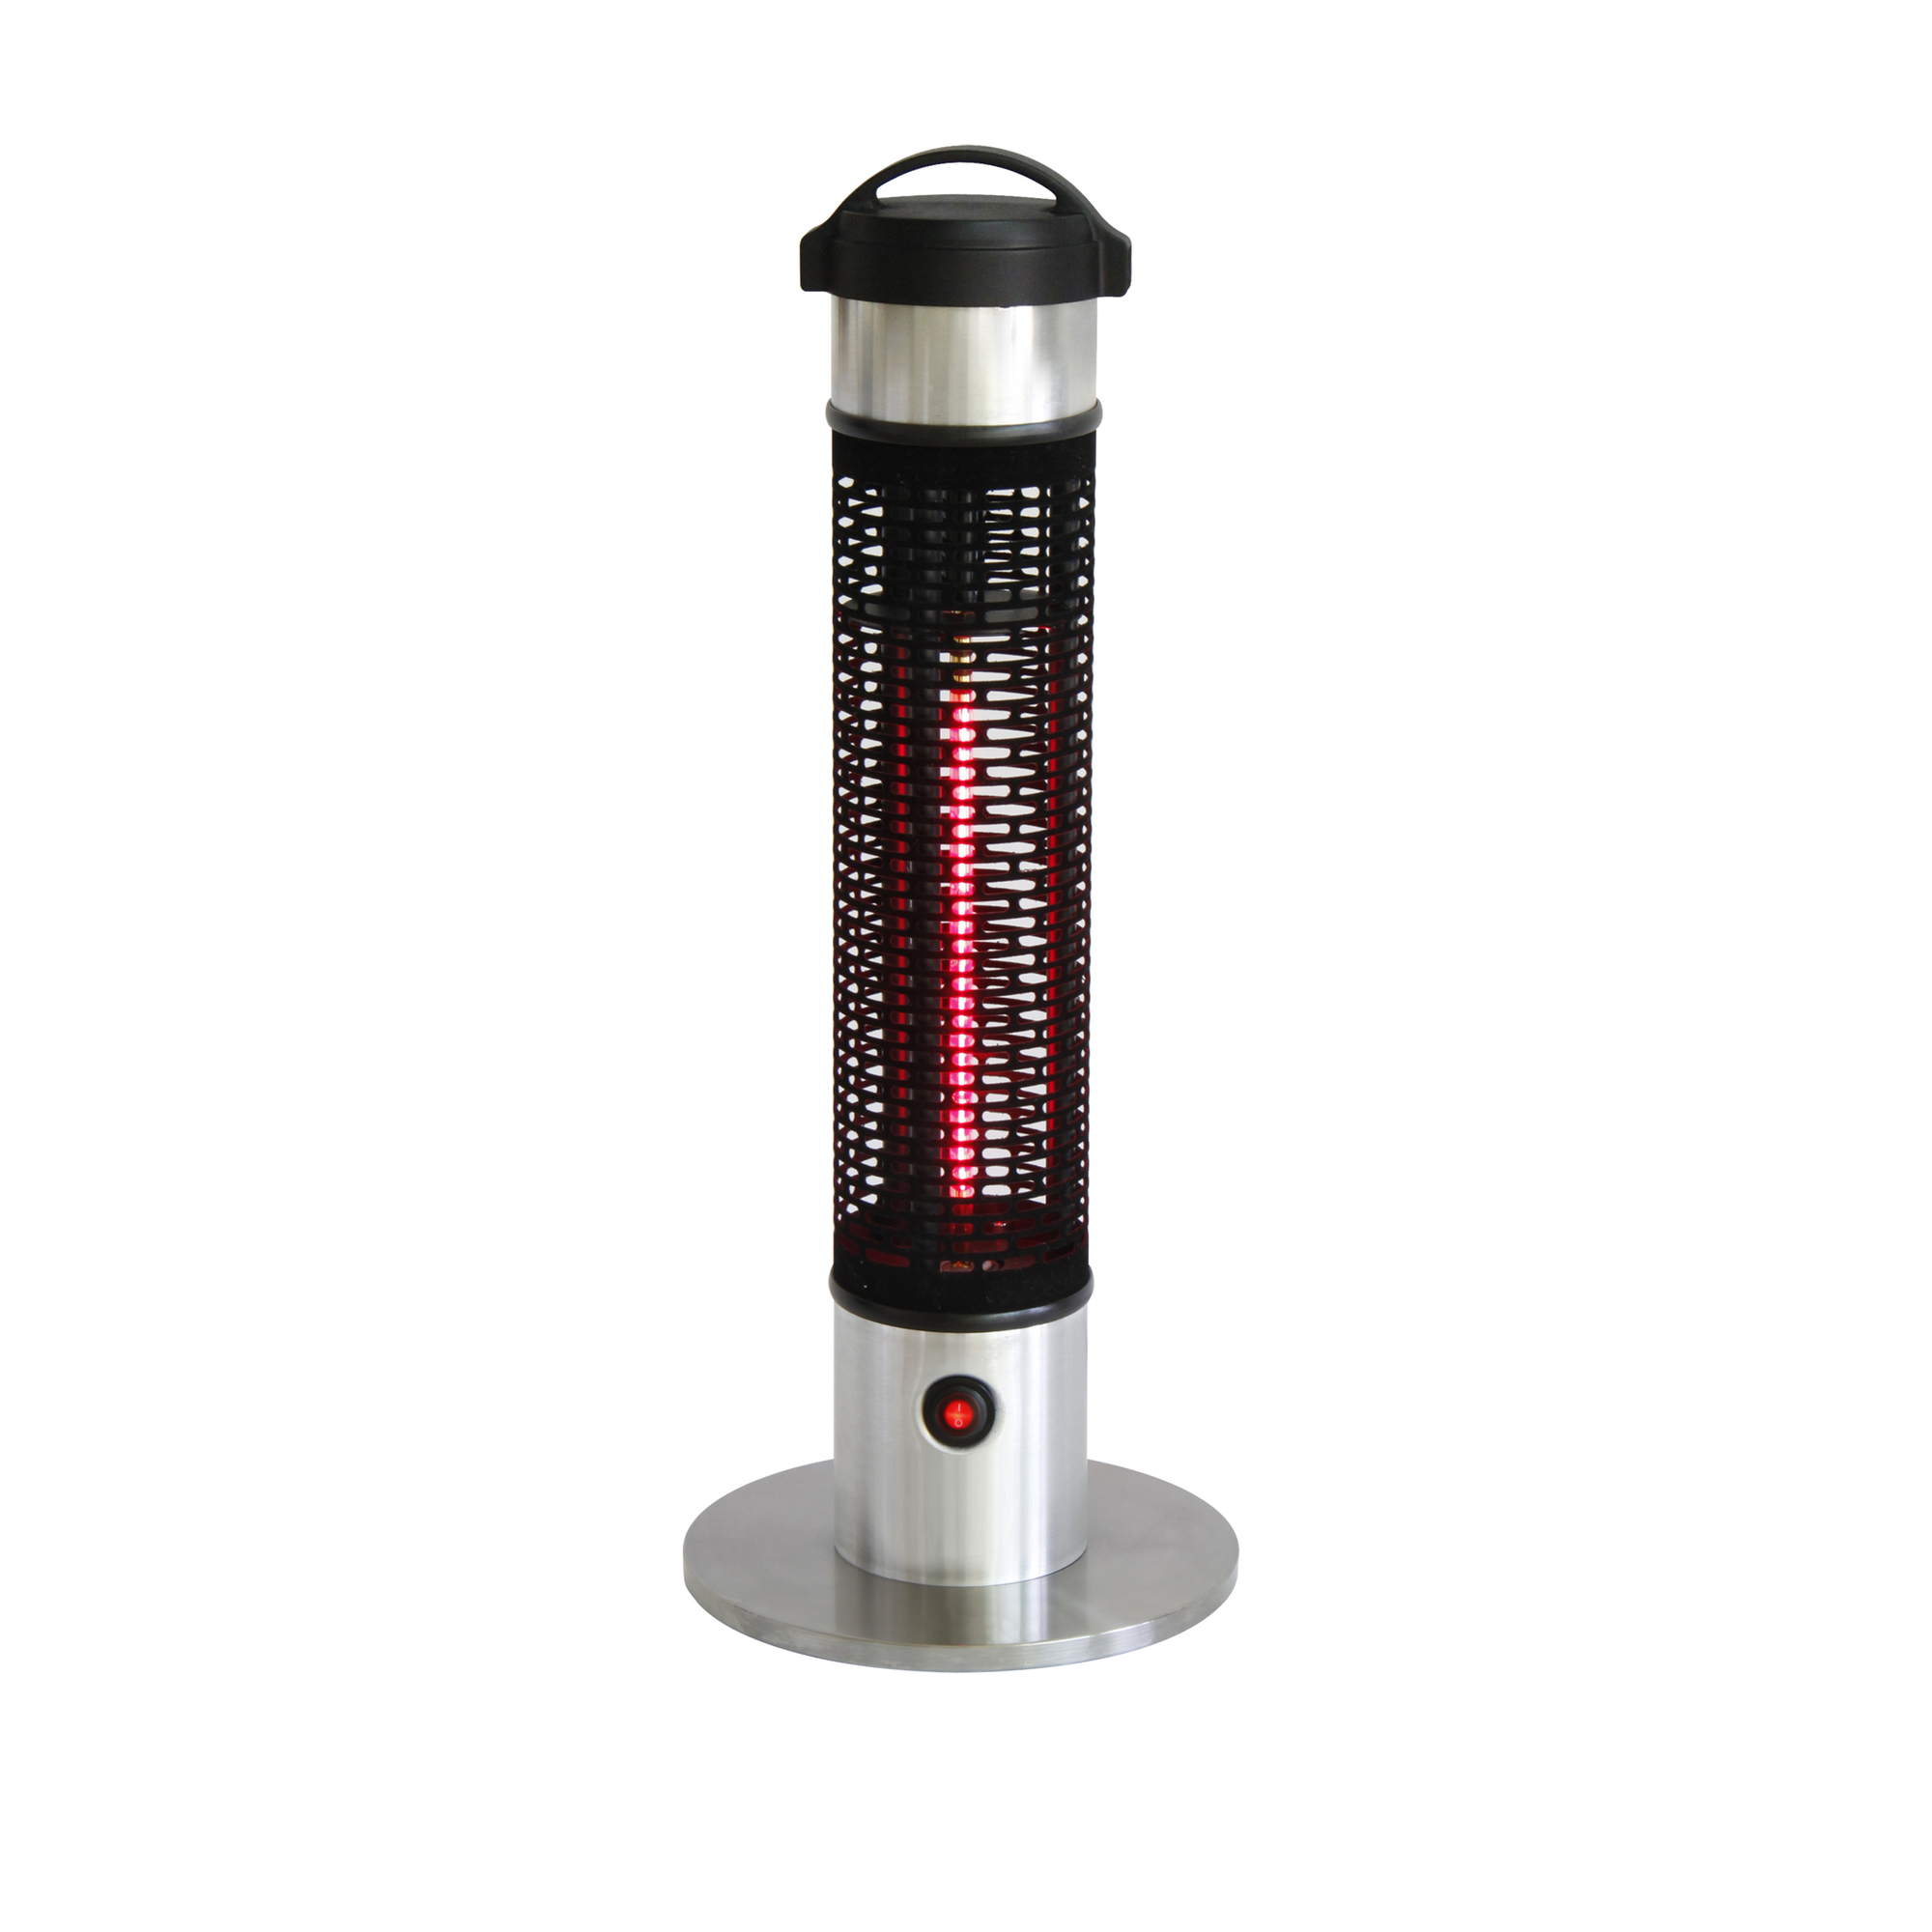 ENERG+, Portable Patio Heater fits under table, Model HEA-21212